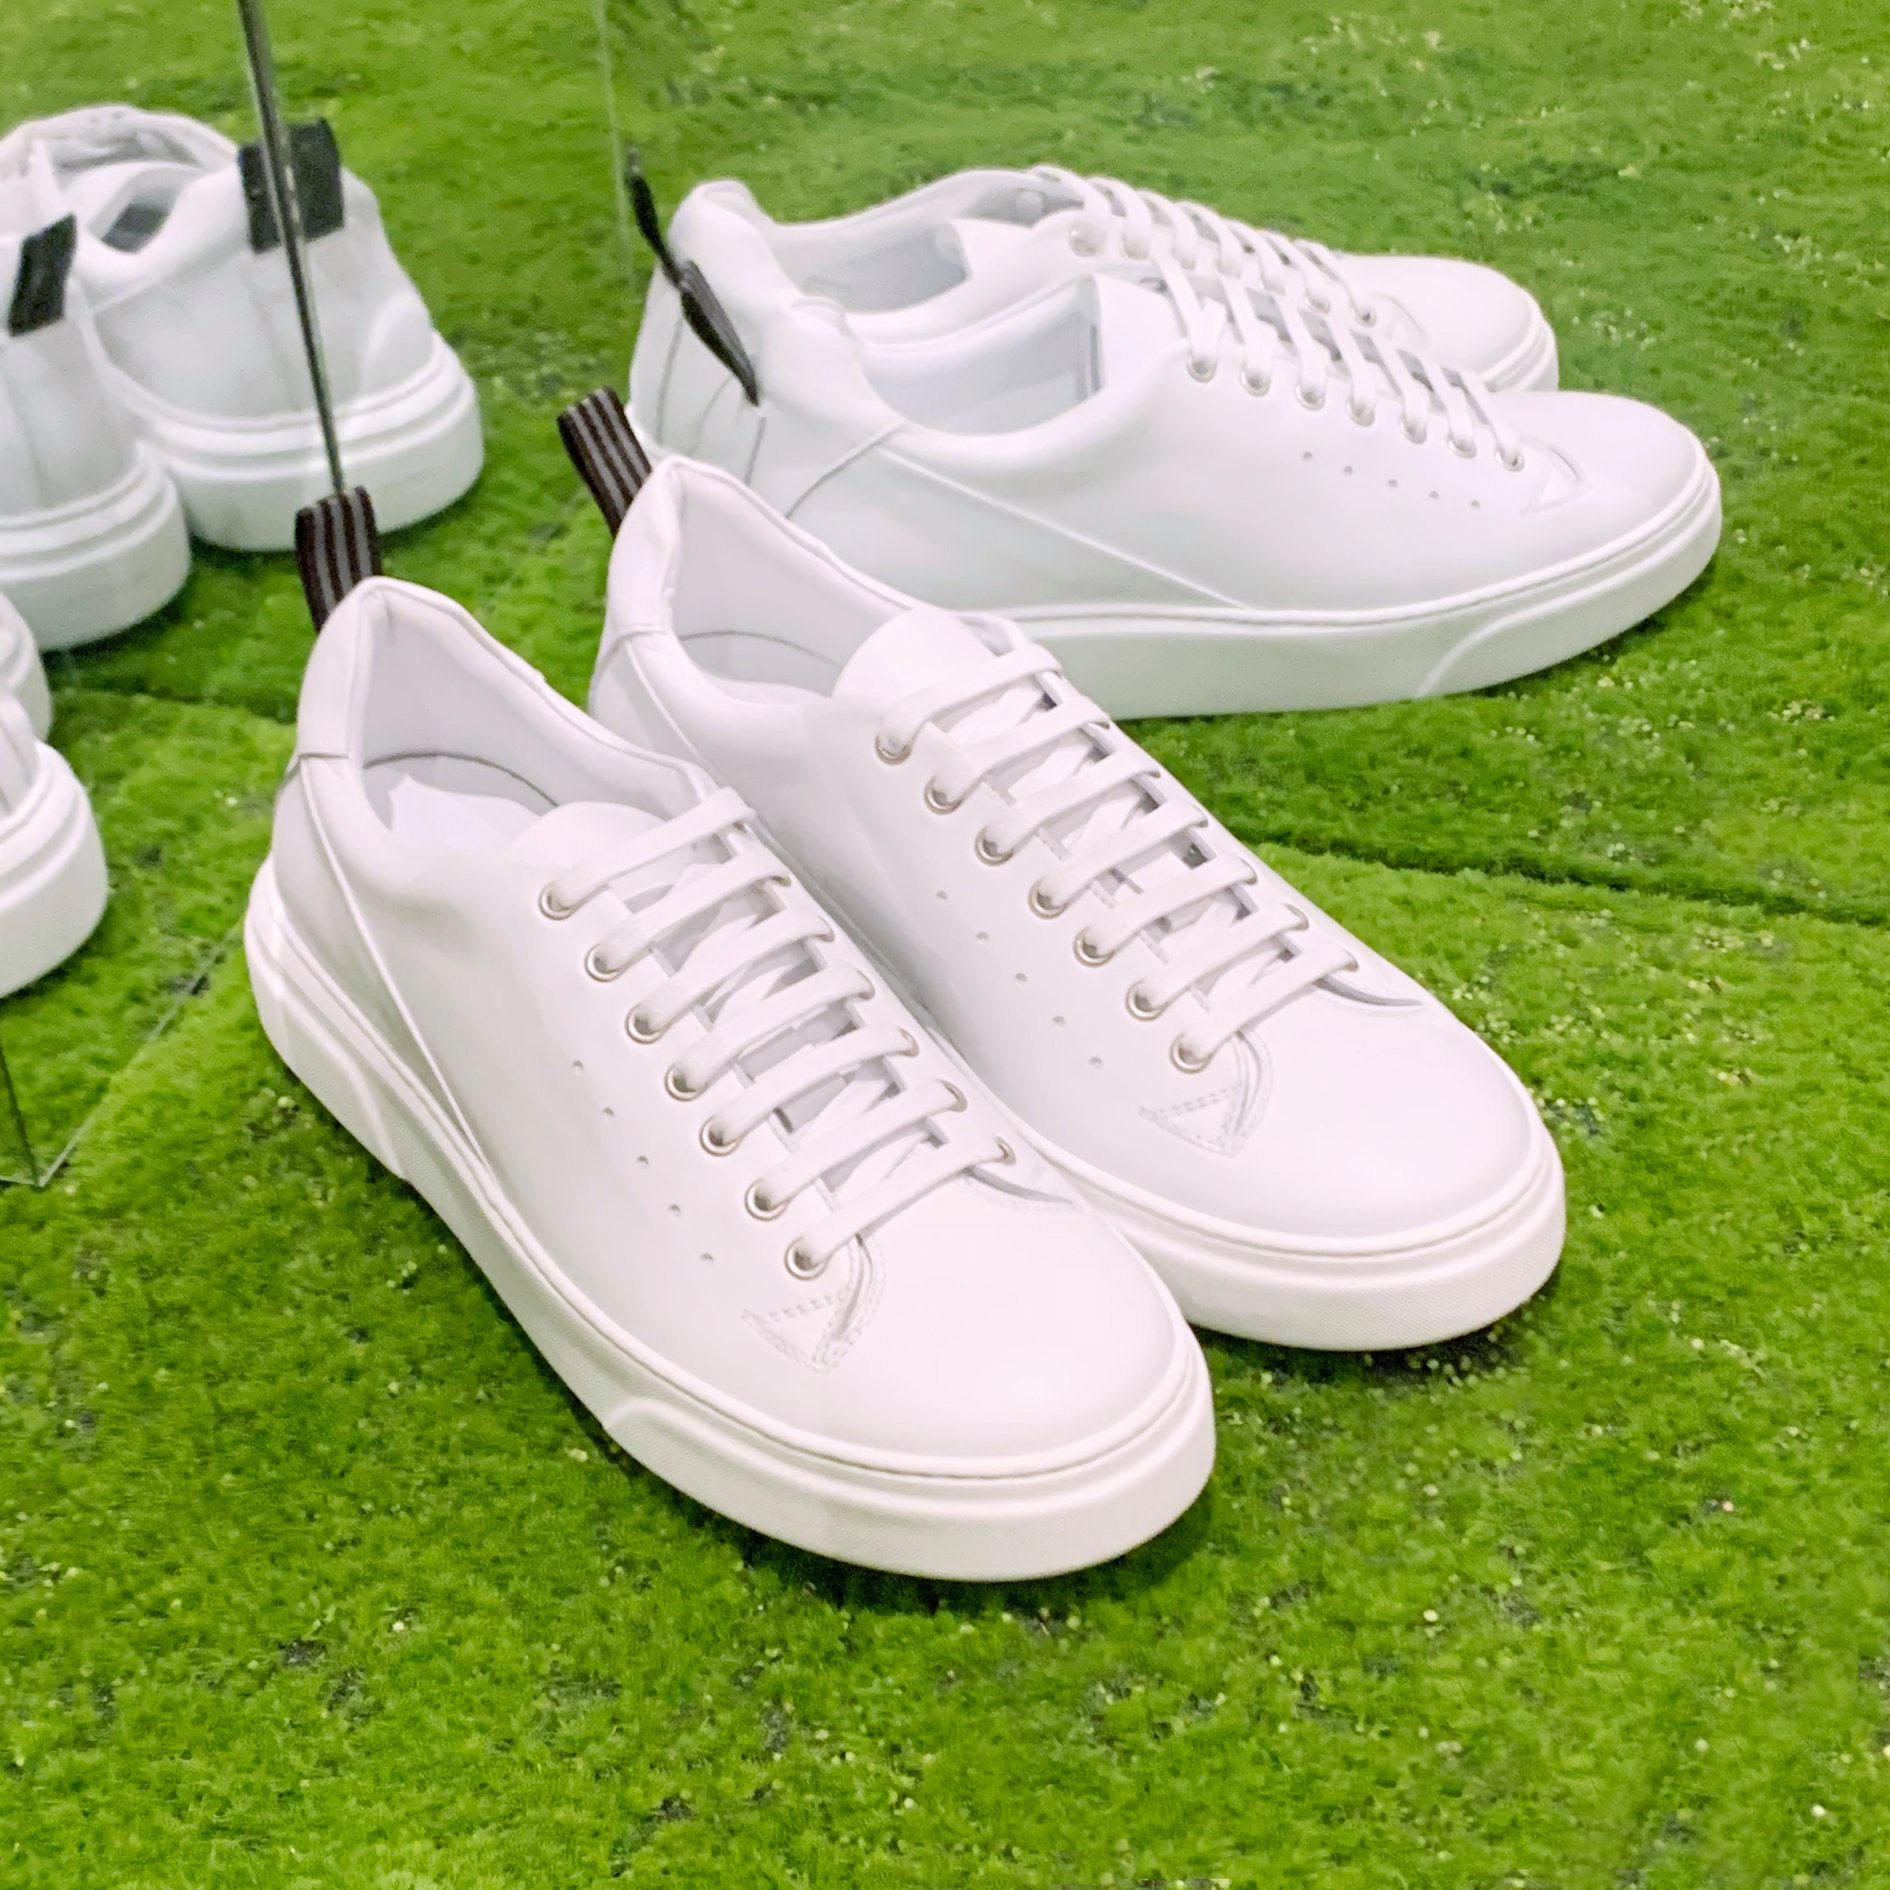 White sneakers are timeless.